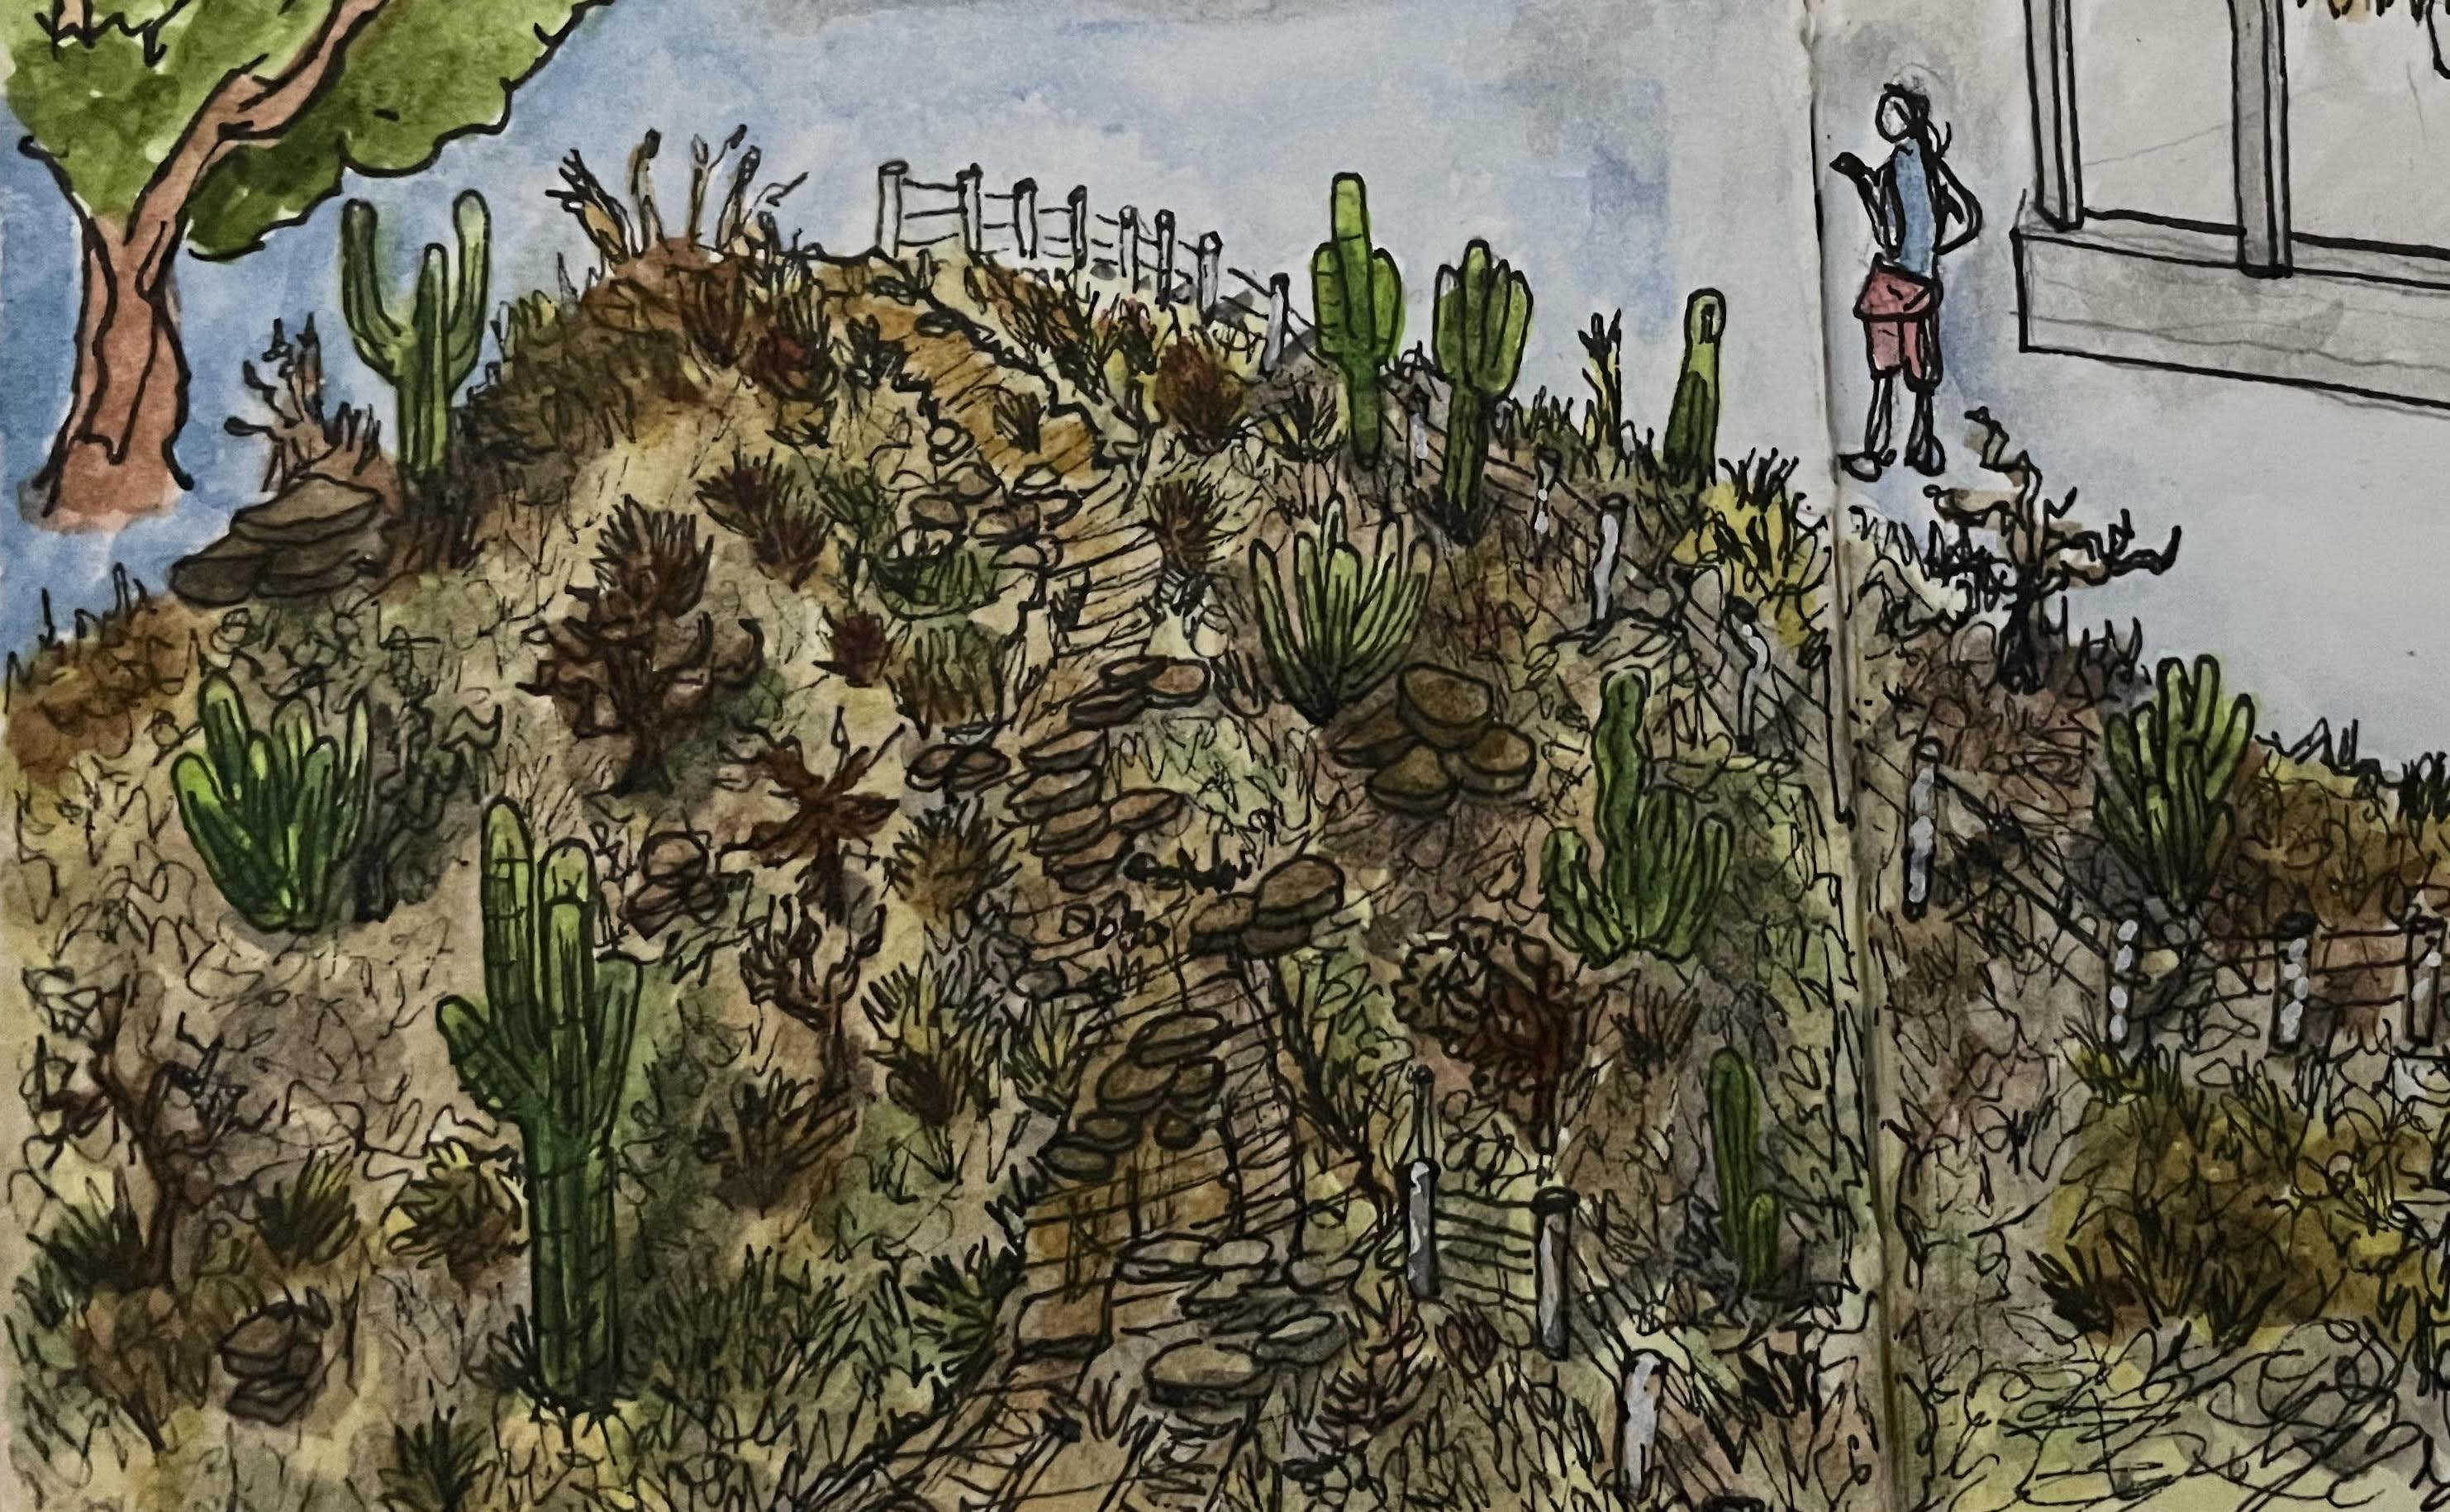 Sketch of a hill in Baja, Mexico